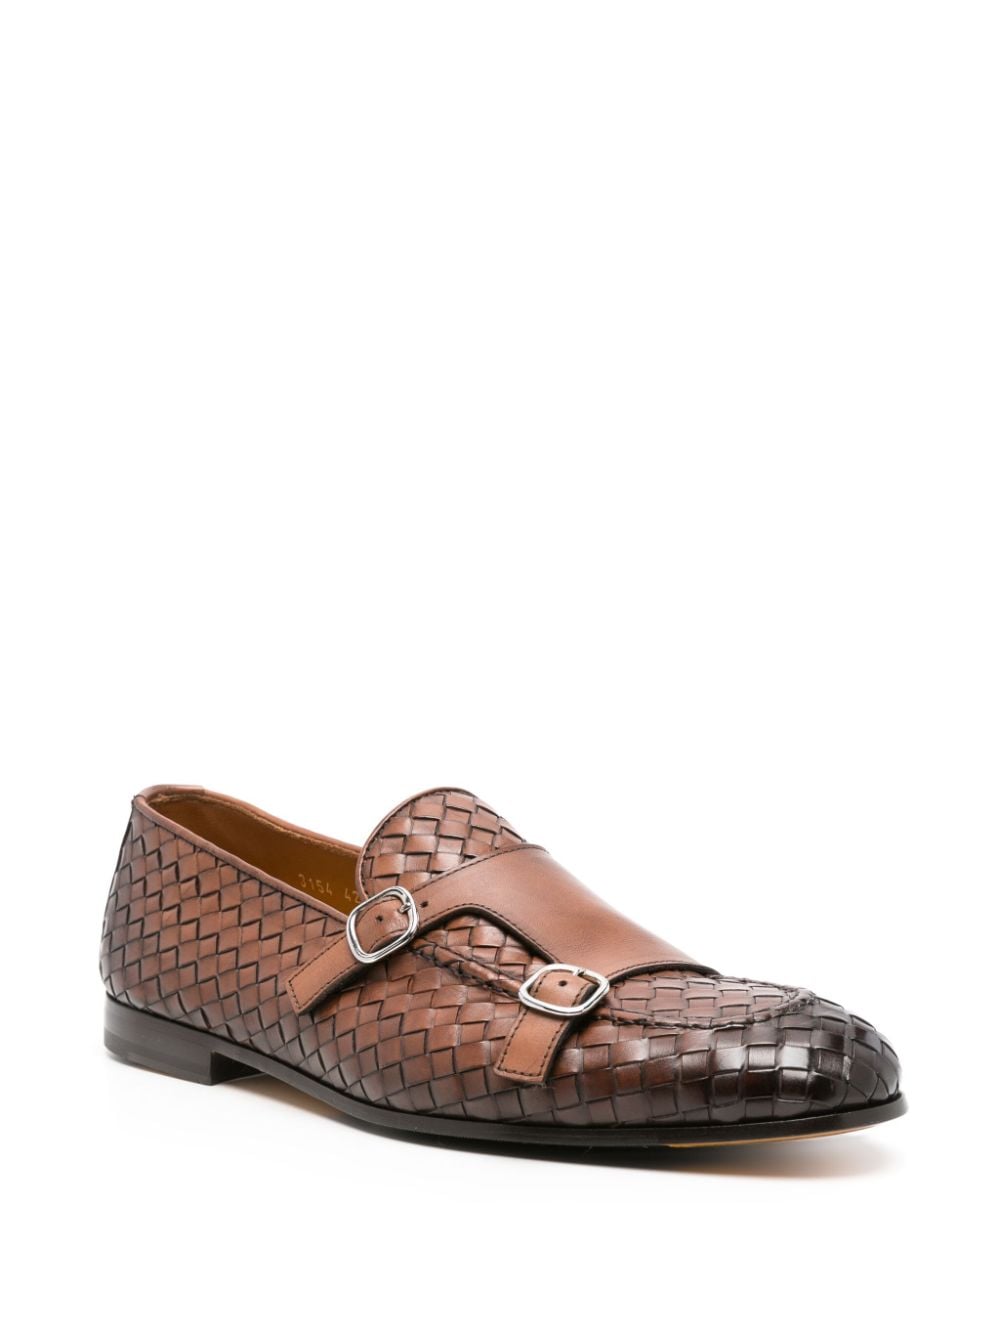 Doucal's interwoven leather monk shoes - Bruin